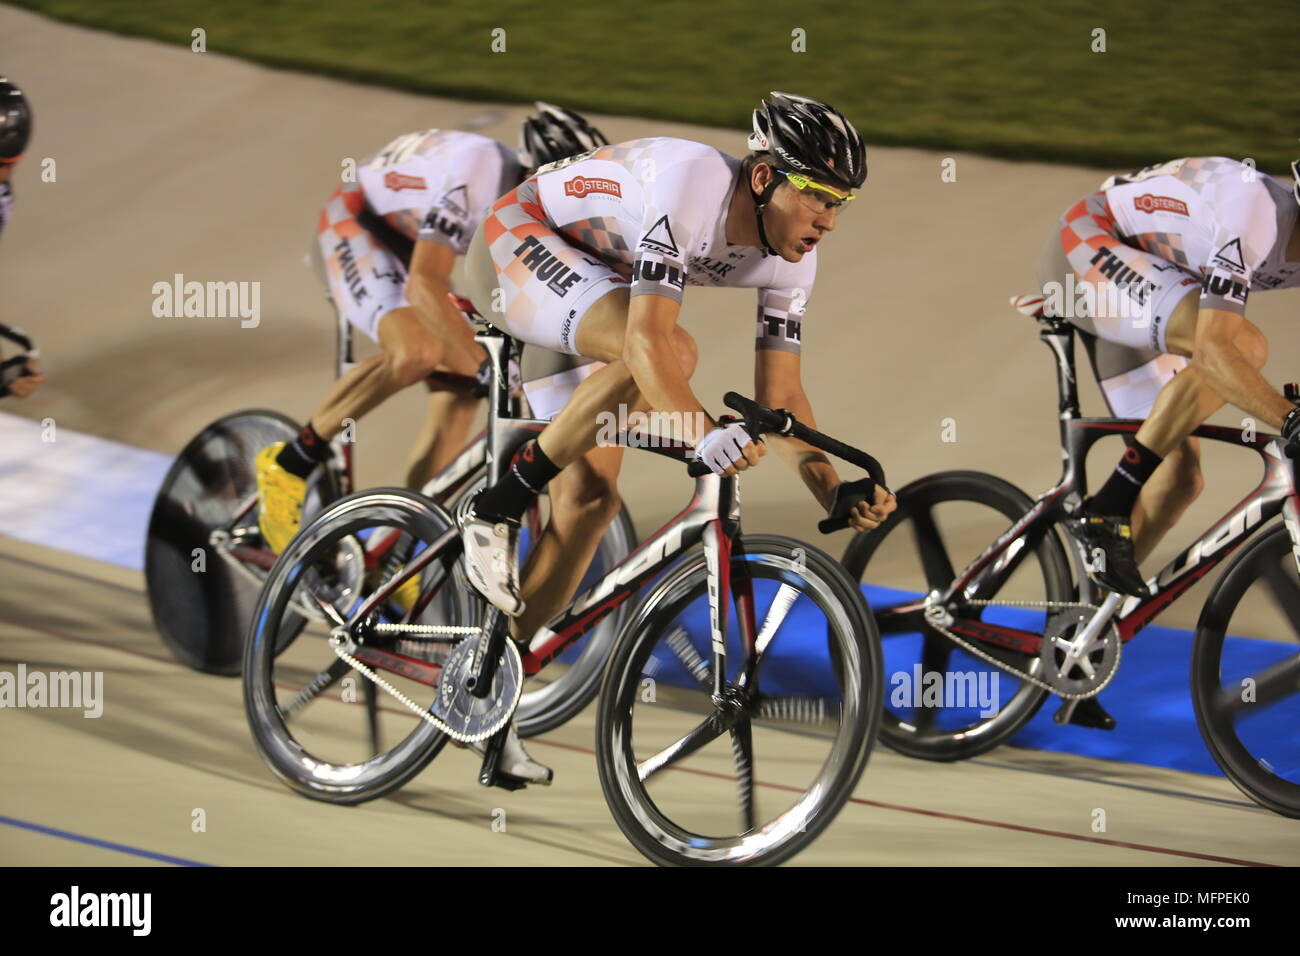 High-speed bicycle racing action at the famous T-Town Cycling Center in Pennsylvania. Stock Photo